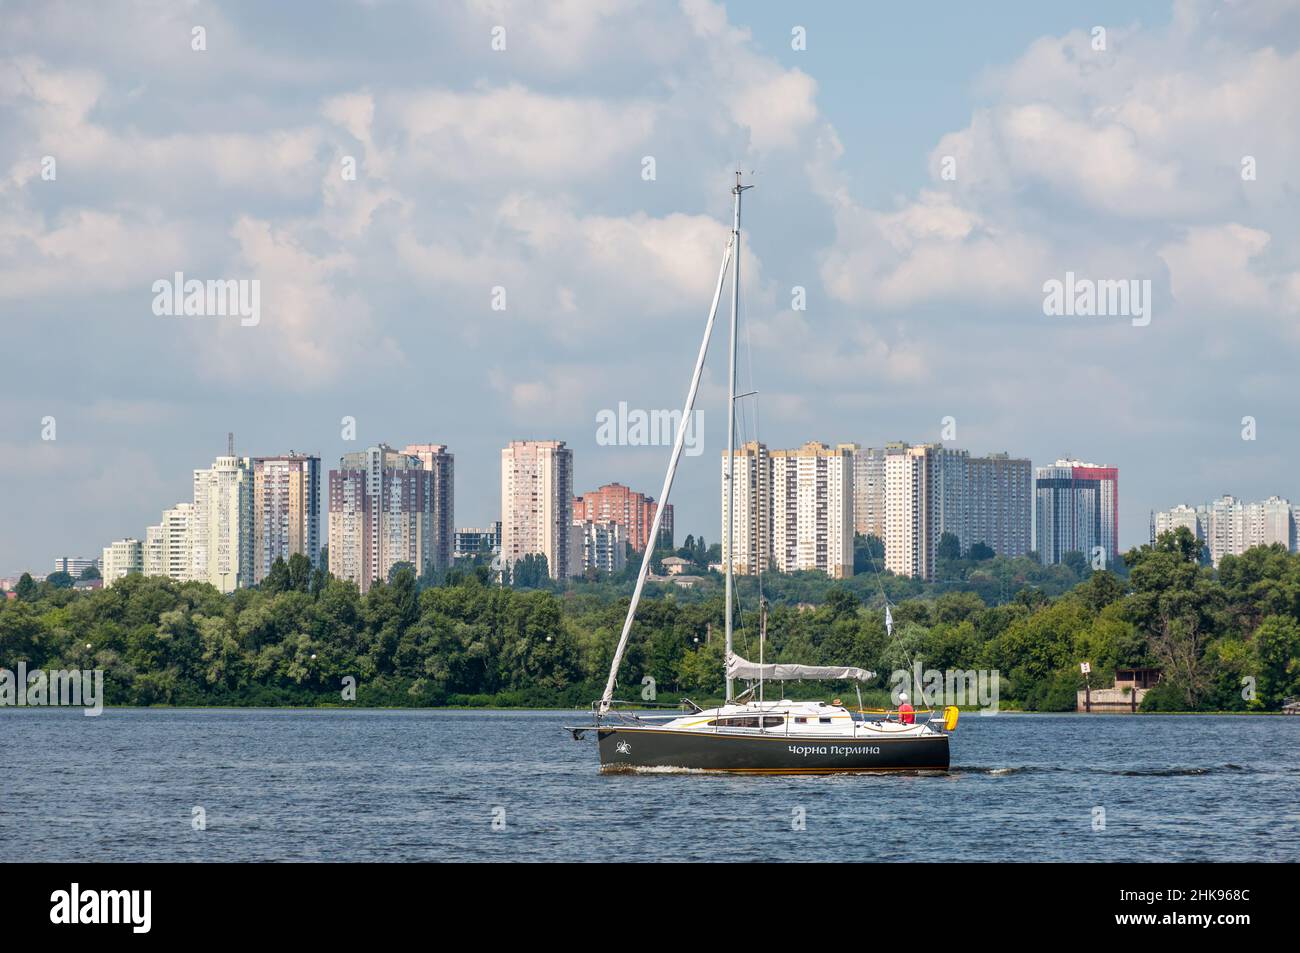 Kyiv, Ukraine - July 3, 2021: Yacht Black Pearl sail along the Dnipro river against the backdrop of a residential area in Kyiv, Ukraine. Stock Photo